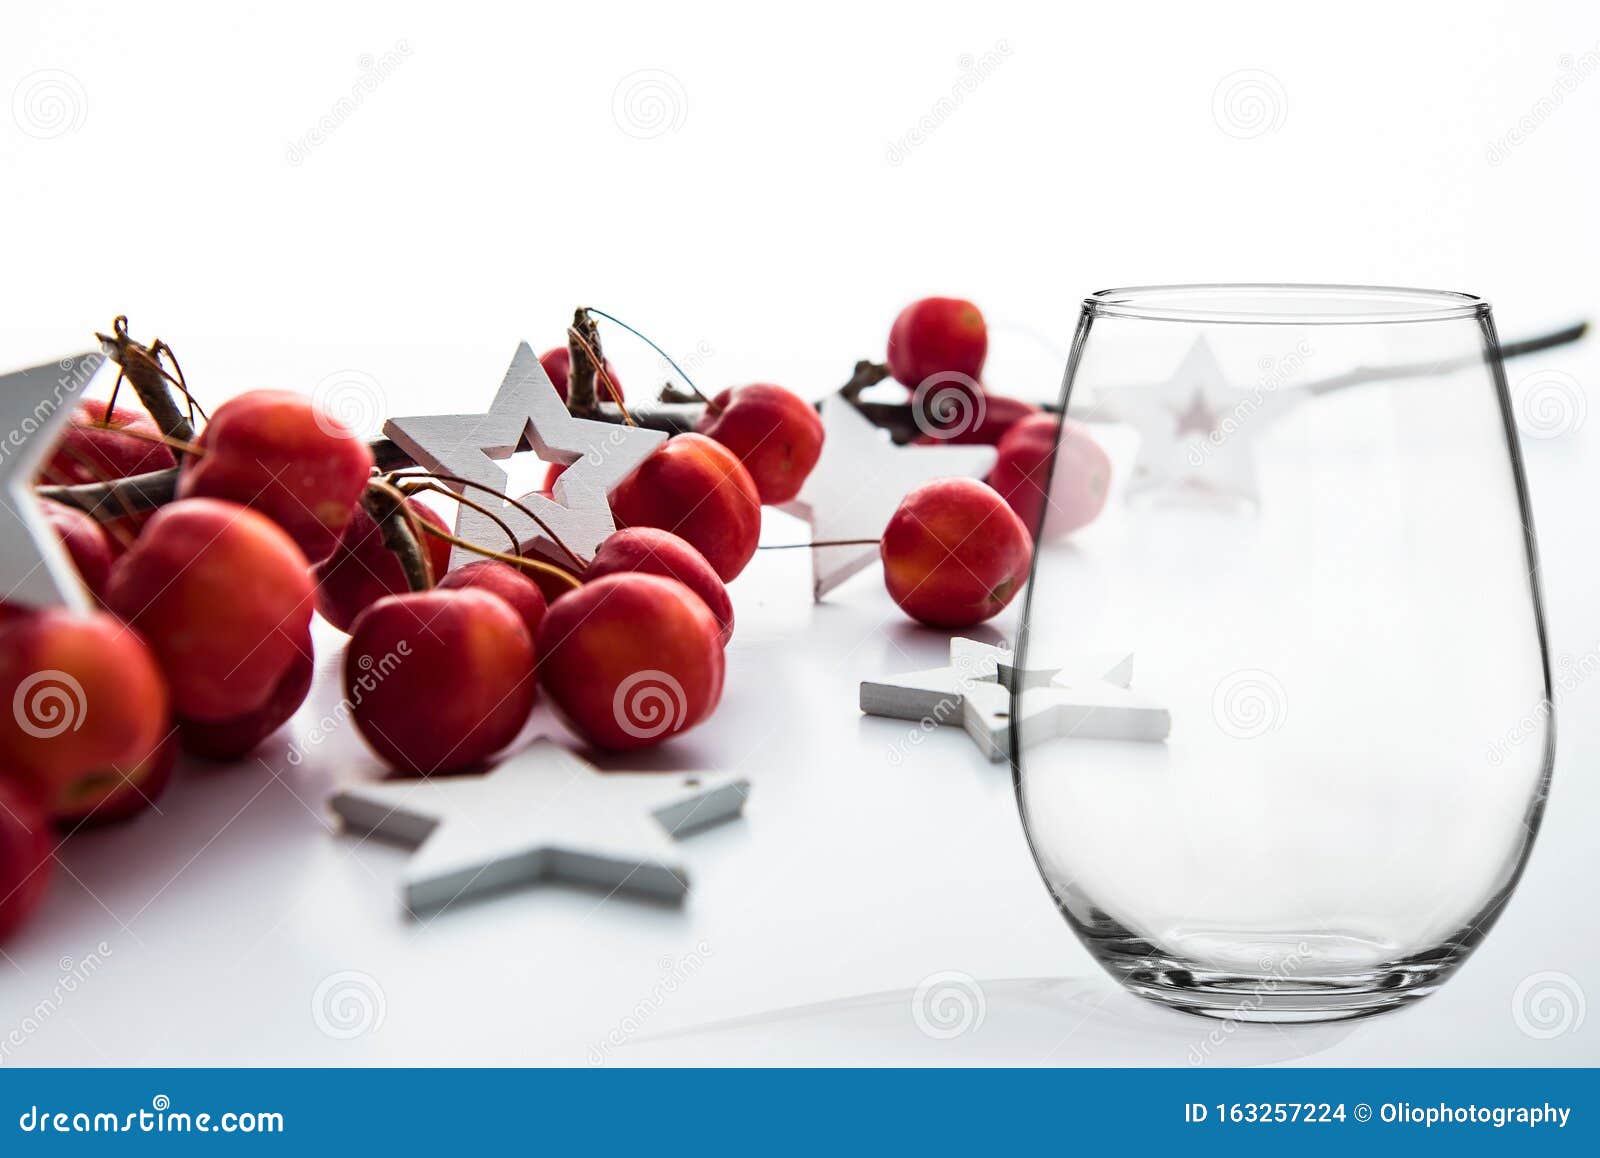 https://thumbs.dreamstime.com/z/white-mug-mockup-feminine-style-pretty-christmas-styled-stemless-wine-glass-great-overlaying-your-custom-quotes-decals-163257224.jpg